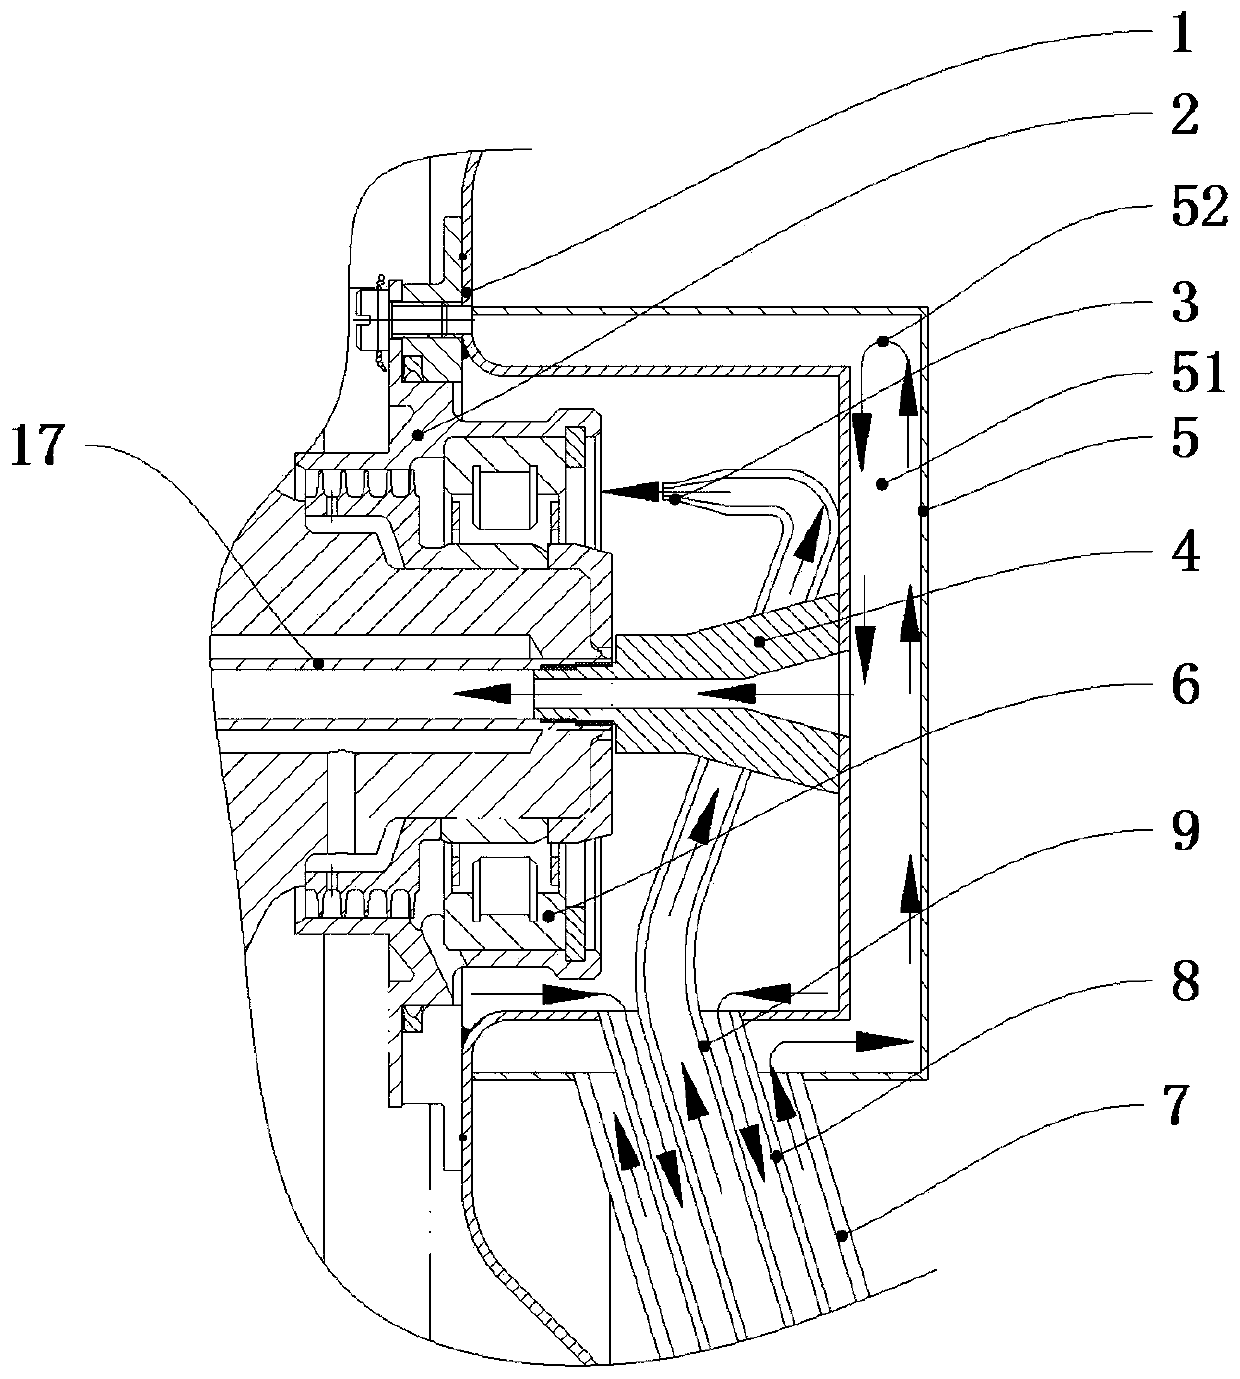 Hot end fuel and lubricating oil pipeline structure of turbine engine